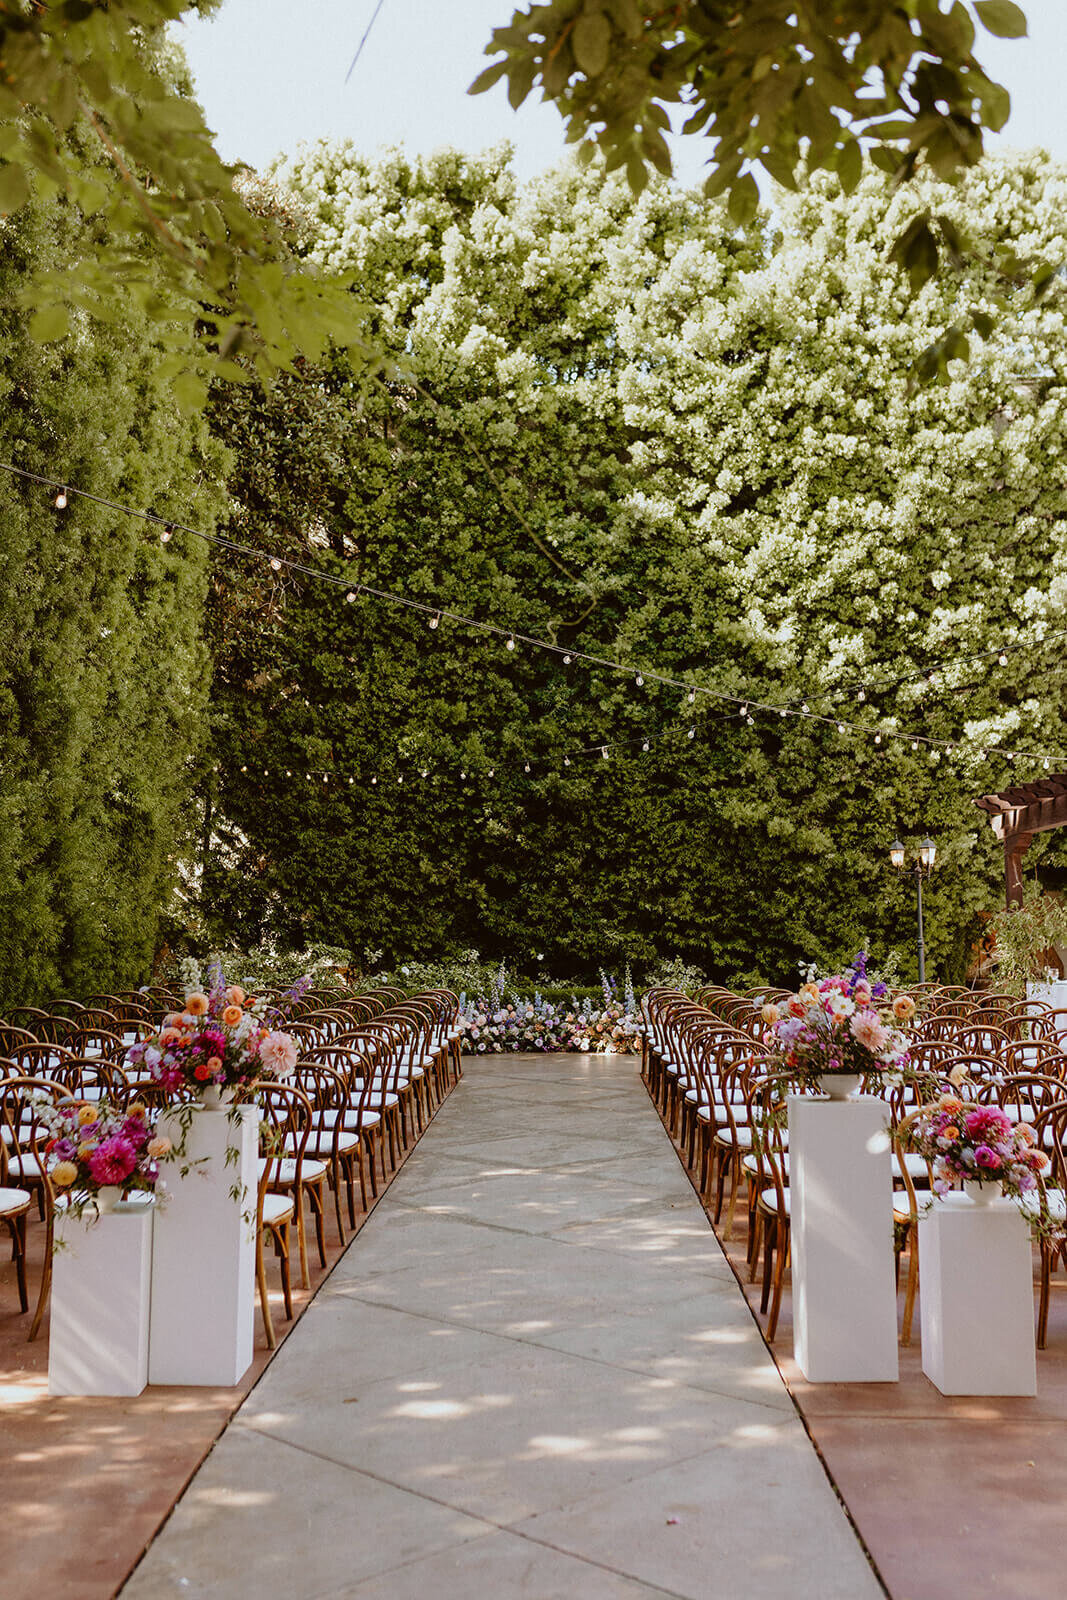 Franciscan Gardens ceremony space with white pillars at the aisle entrance with colorful flowers